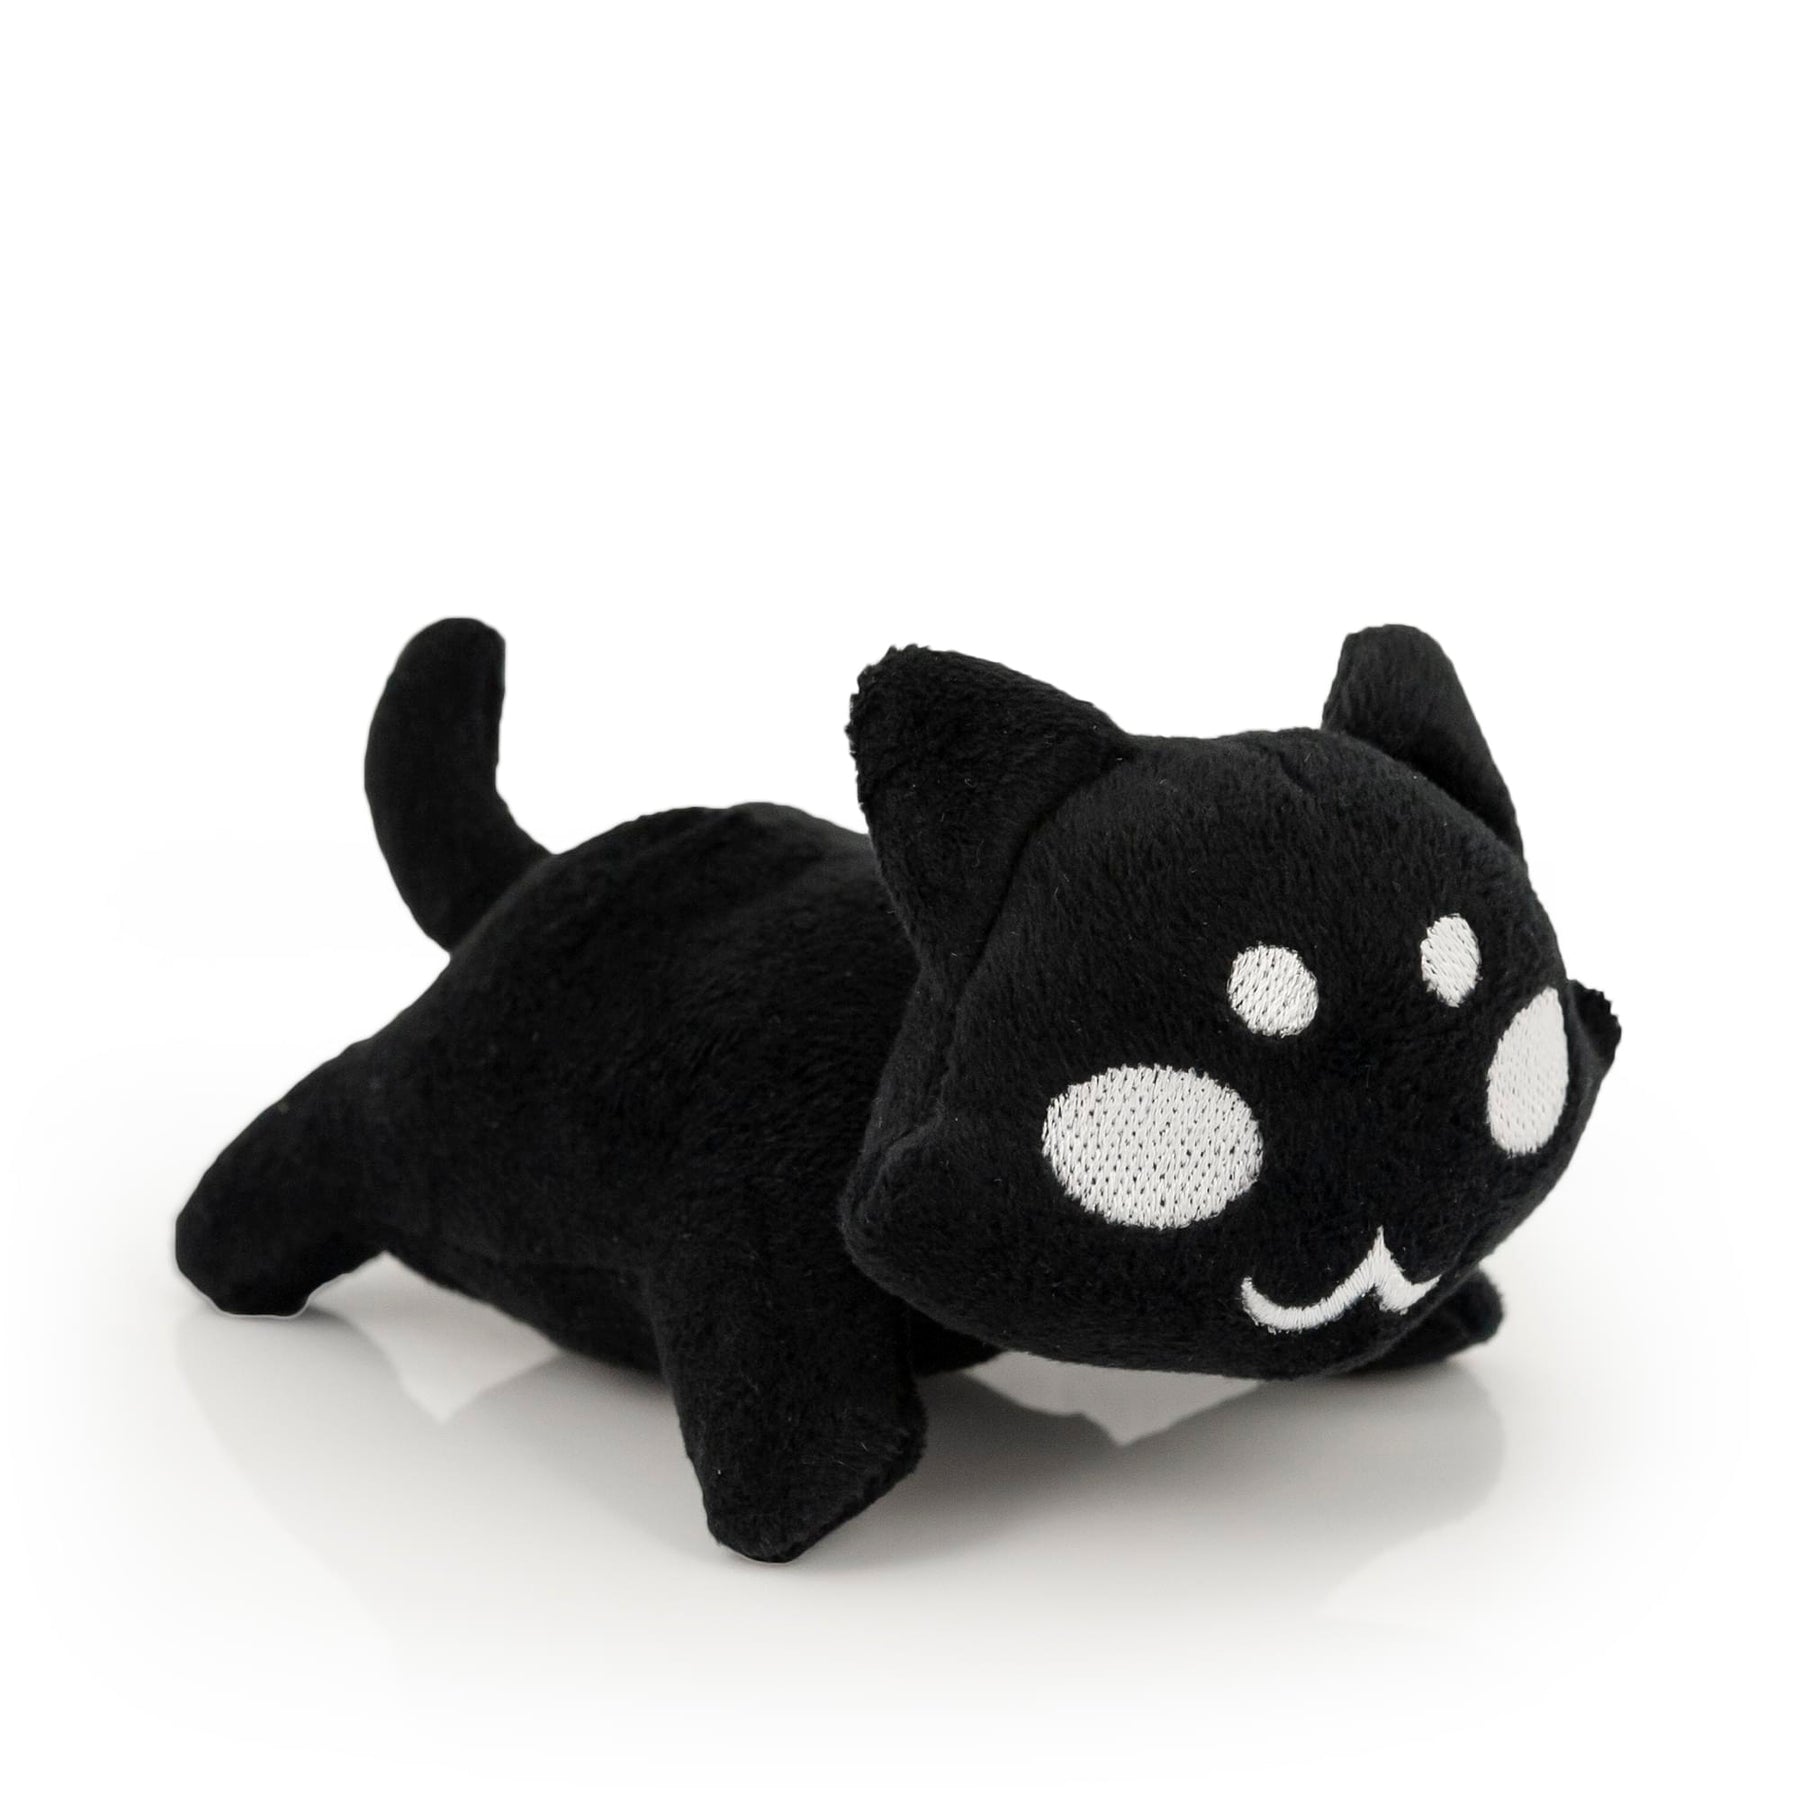 Homestuck Mutie Plush Doll | Collectible Homestuck Character | 5.5 Inches Long